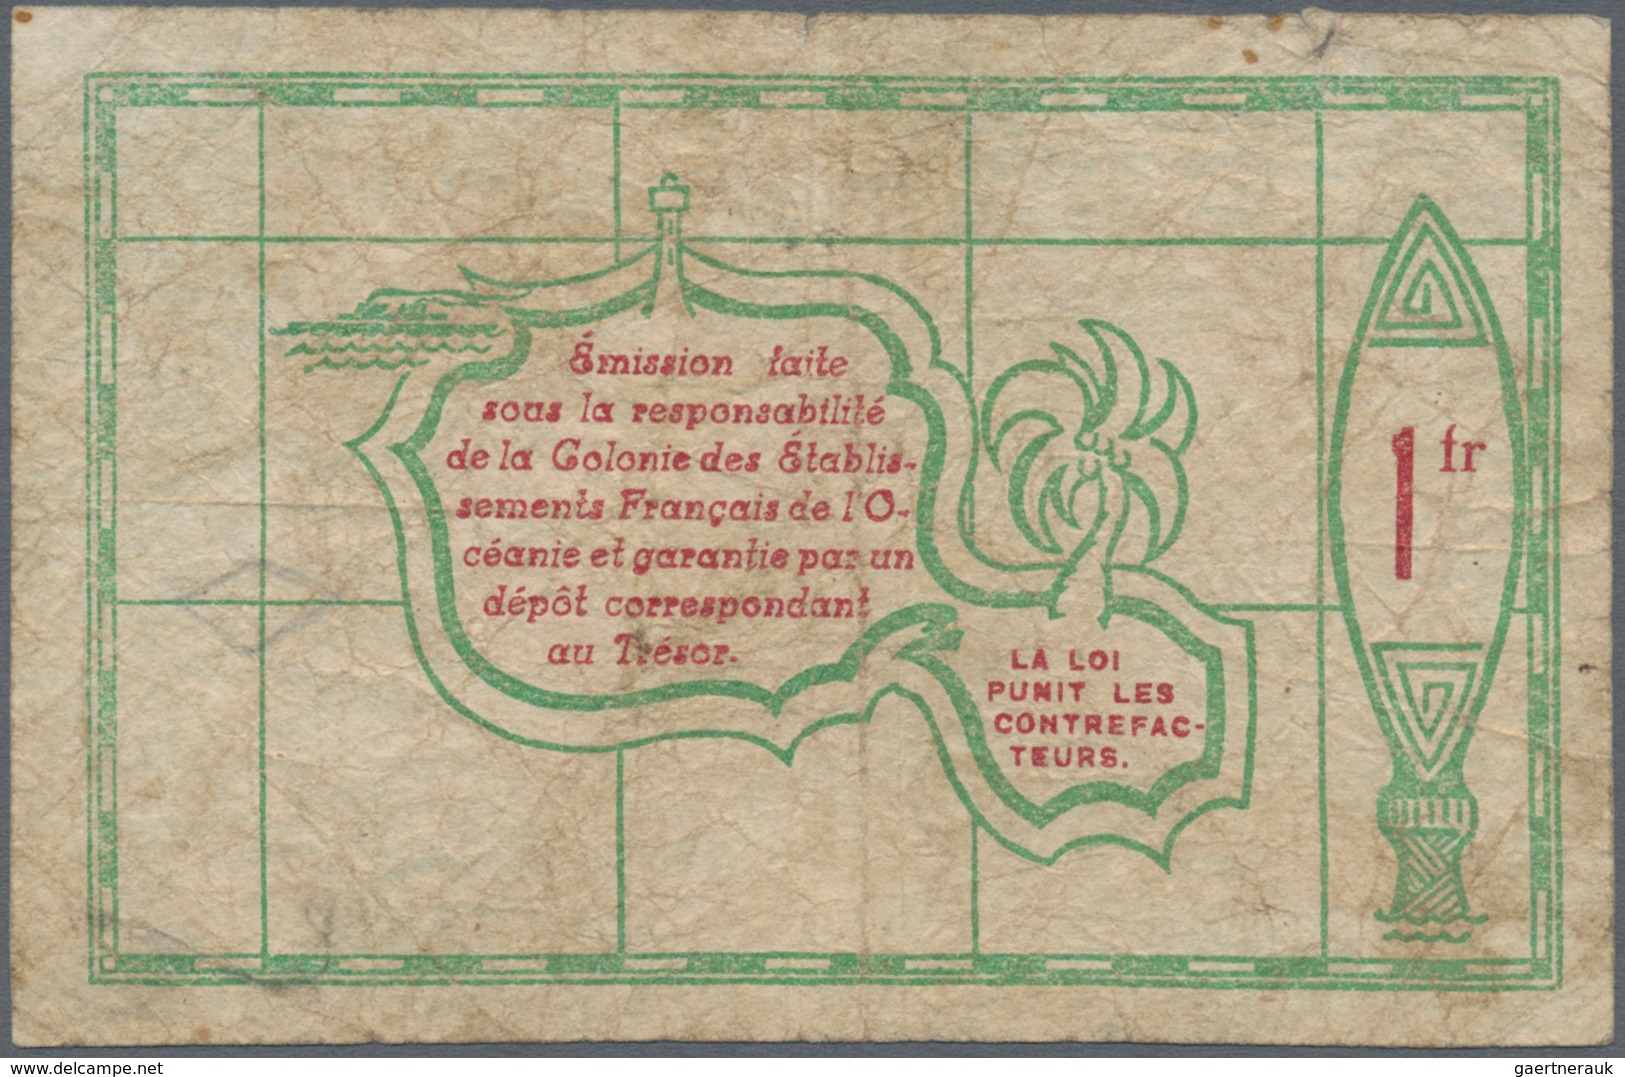 French Oceania / Französisch Ozeanien: 1 Franc L.25.09.1943 P. 11c, Well Used With Many Folds And Cr - Ohne Zuordnung